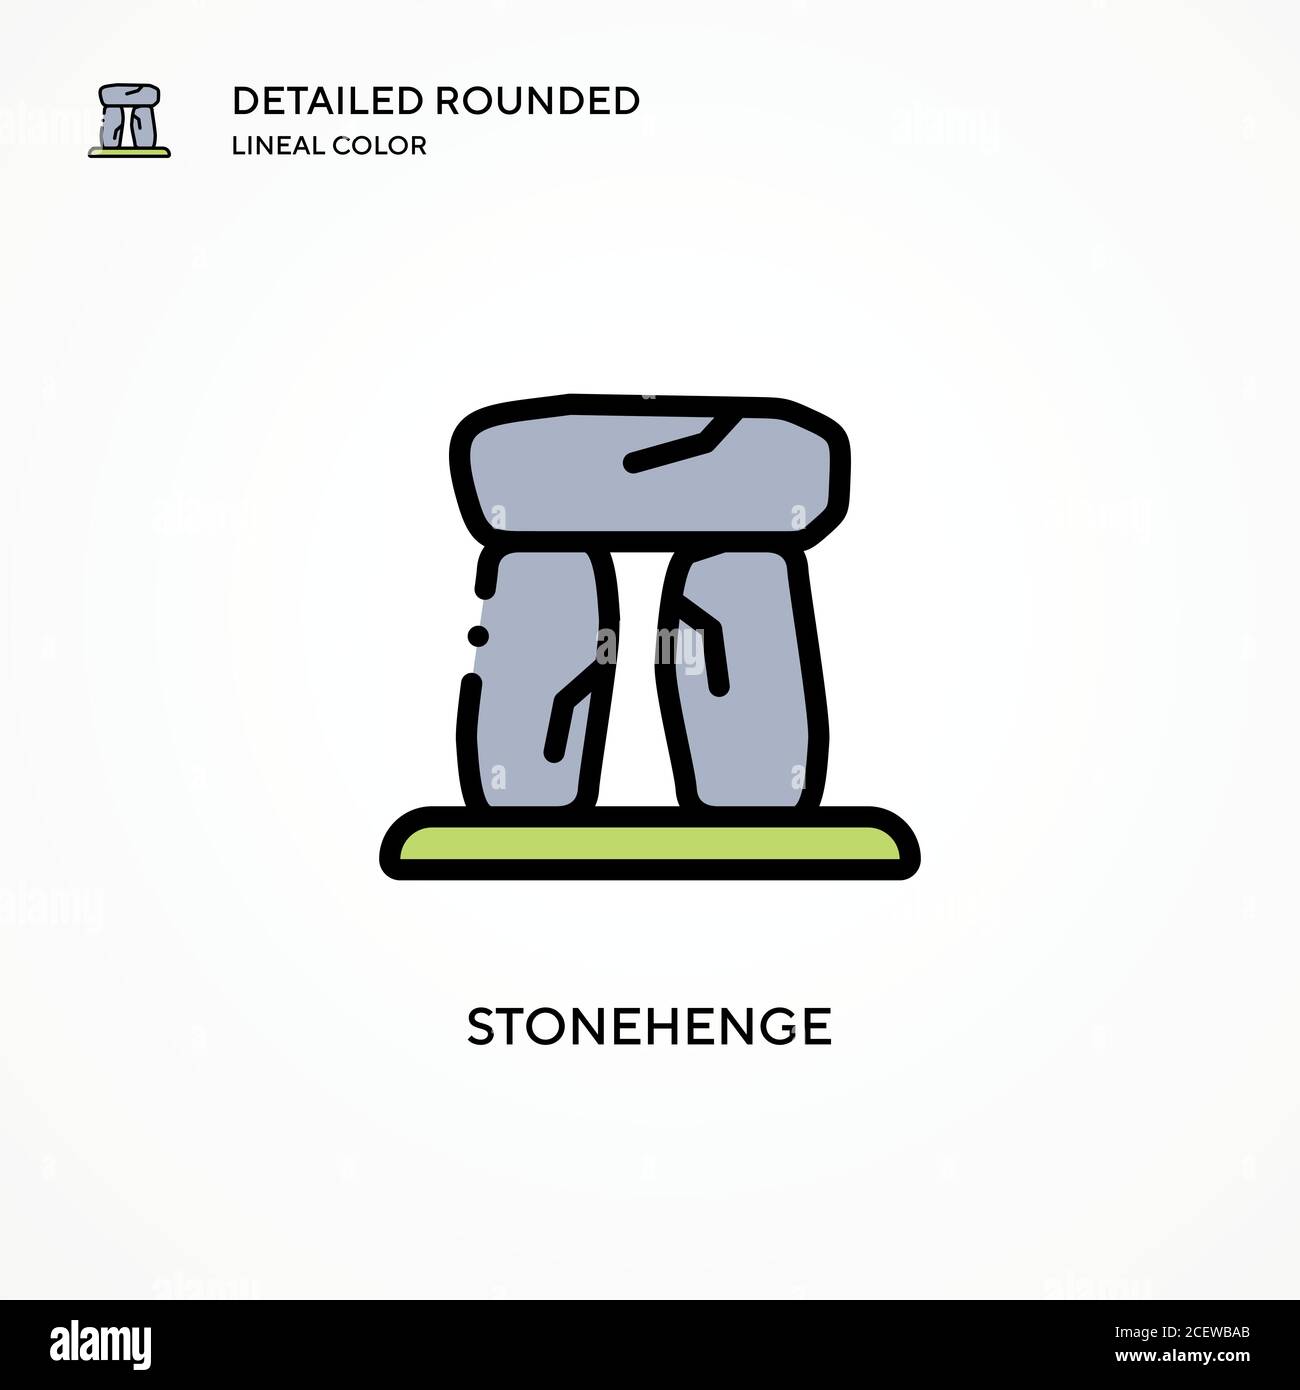 Stonehenge vector icon. Modern vector illustration concepts. Easy to edit and customize. Stock Vector